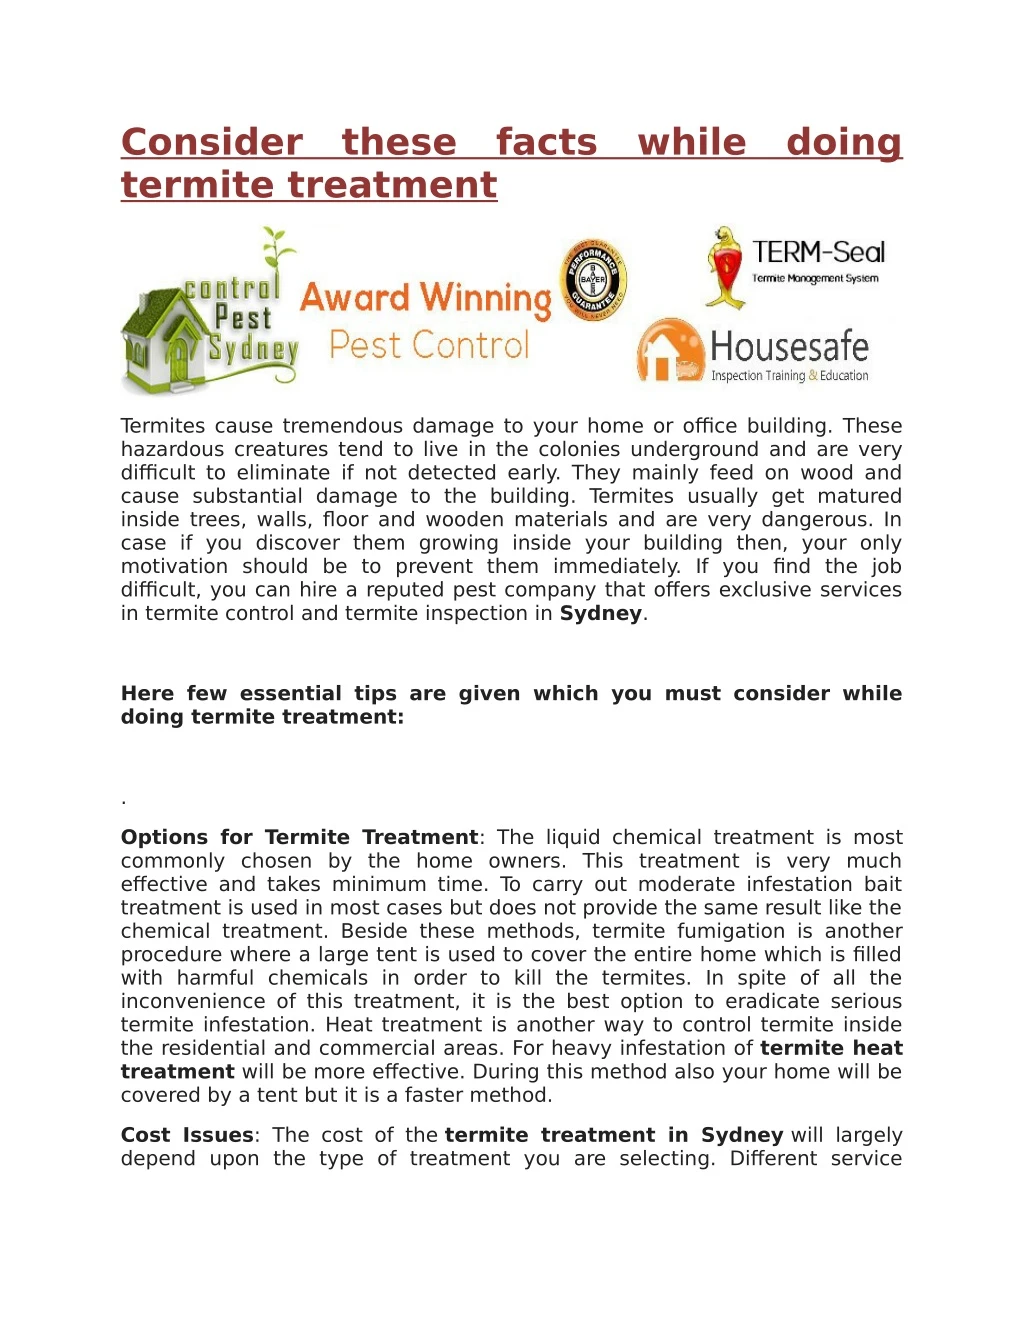 consider these facts while doing termite treatment